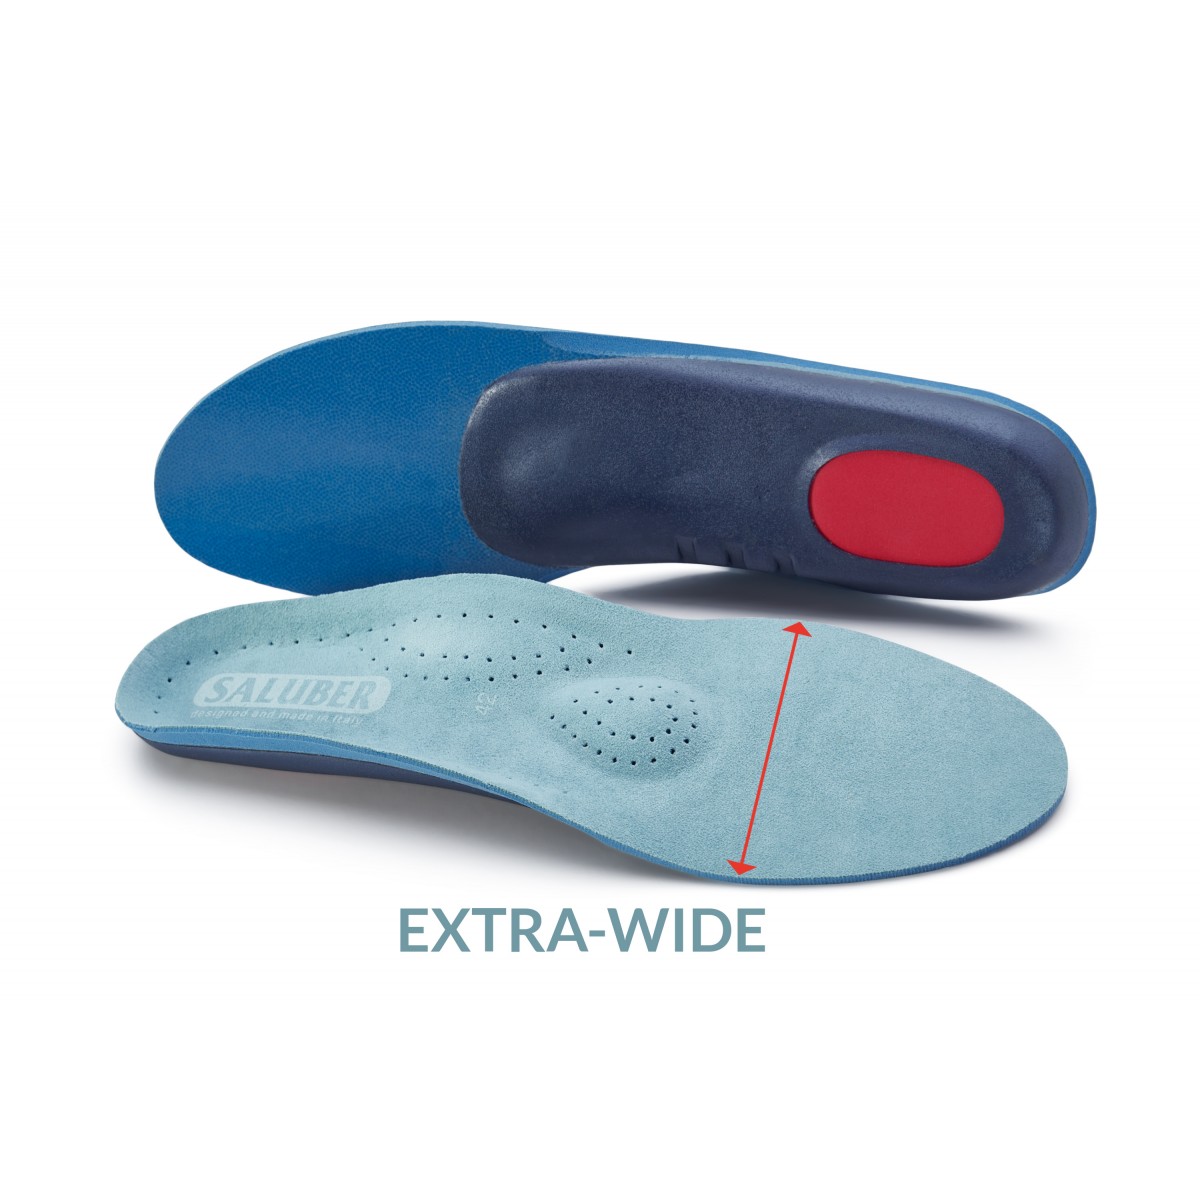 Premium Orthotic Insoles for Men Women - High Arch Support Shoe